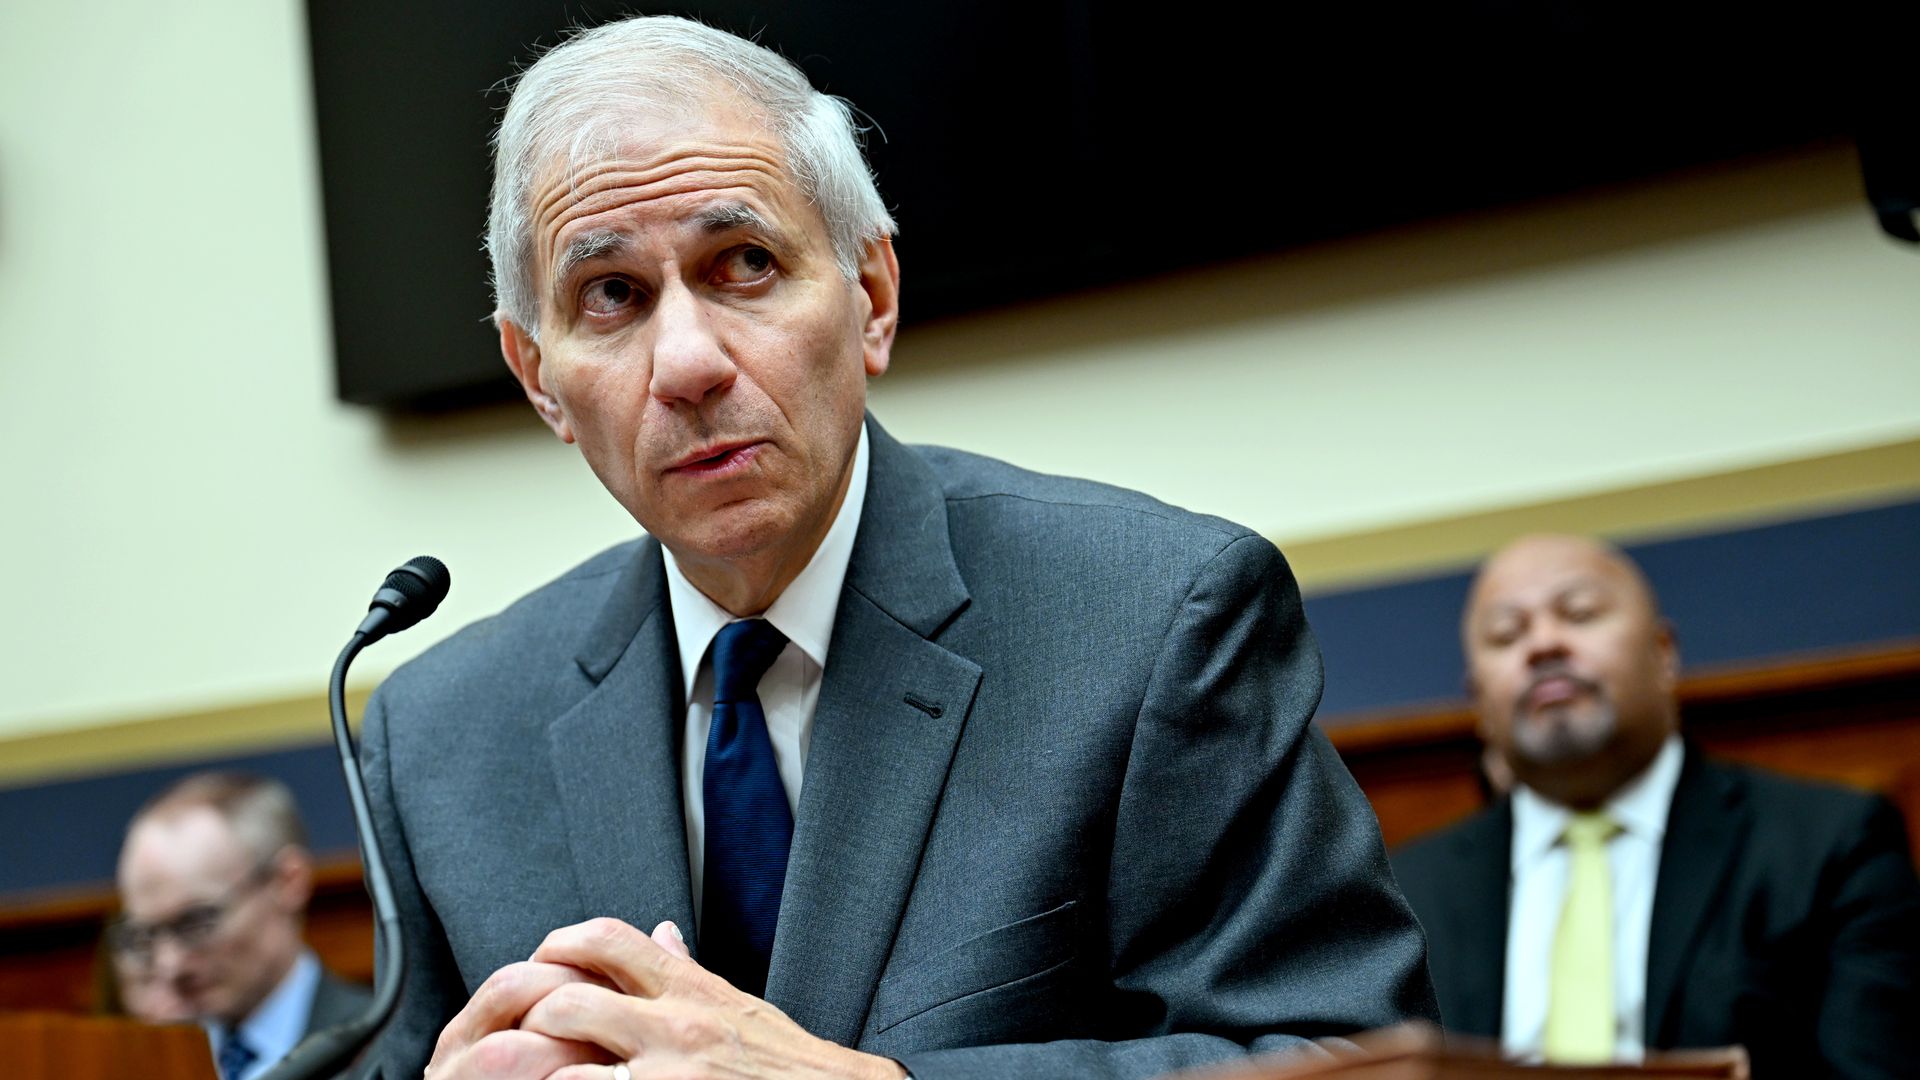 FDIC Chair Martin Gruenberg at a House Committee hearing.